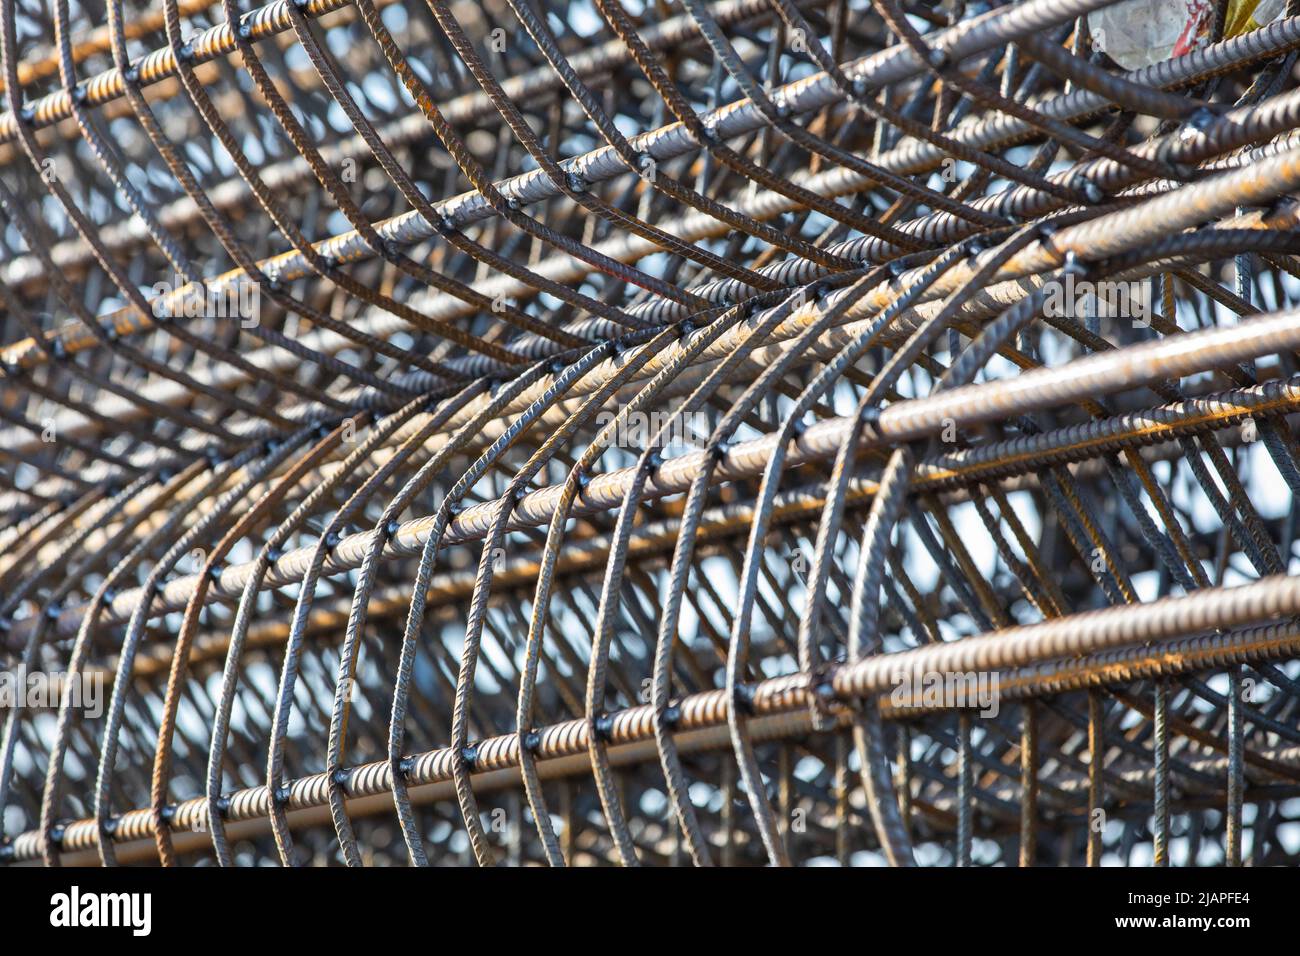 Rebar. Iron bars used for reinforcing concrete Stock Photo